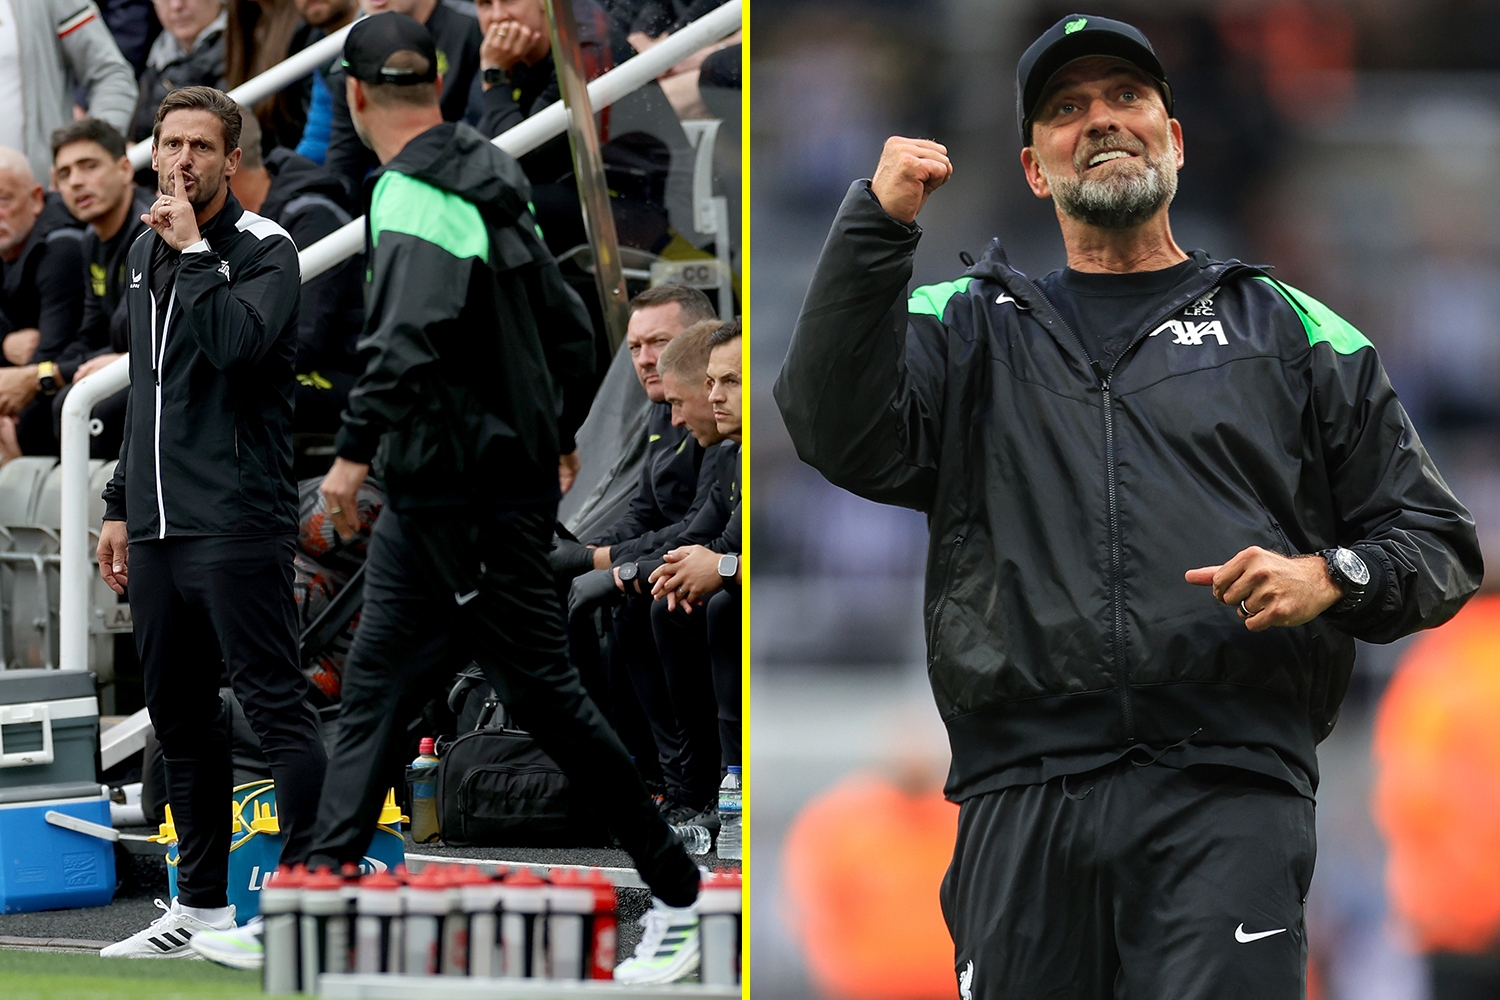 Jurgen Klopp gets last laugh after being shushed by Jason Tindall and reasserts record dominance over Eddie Howe and Newcastle assistant